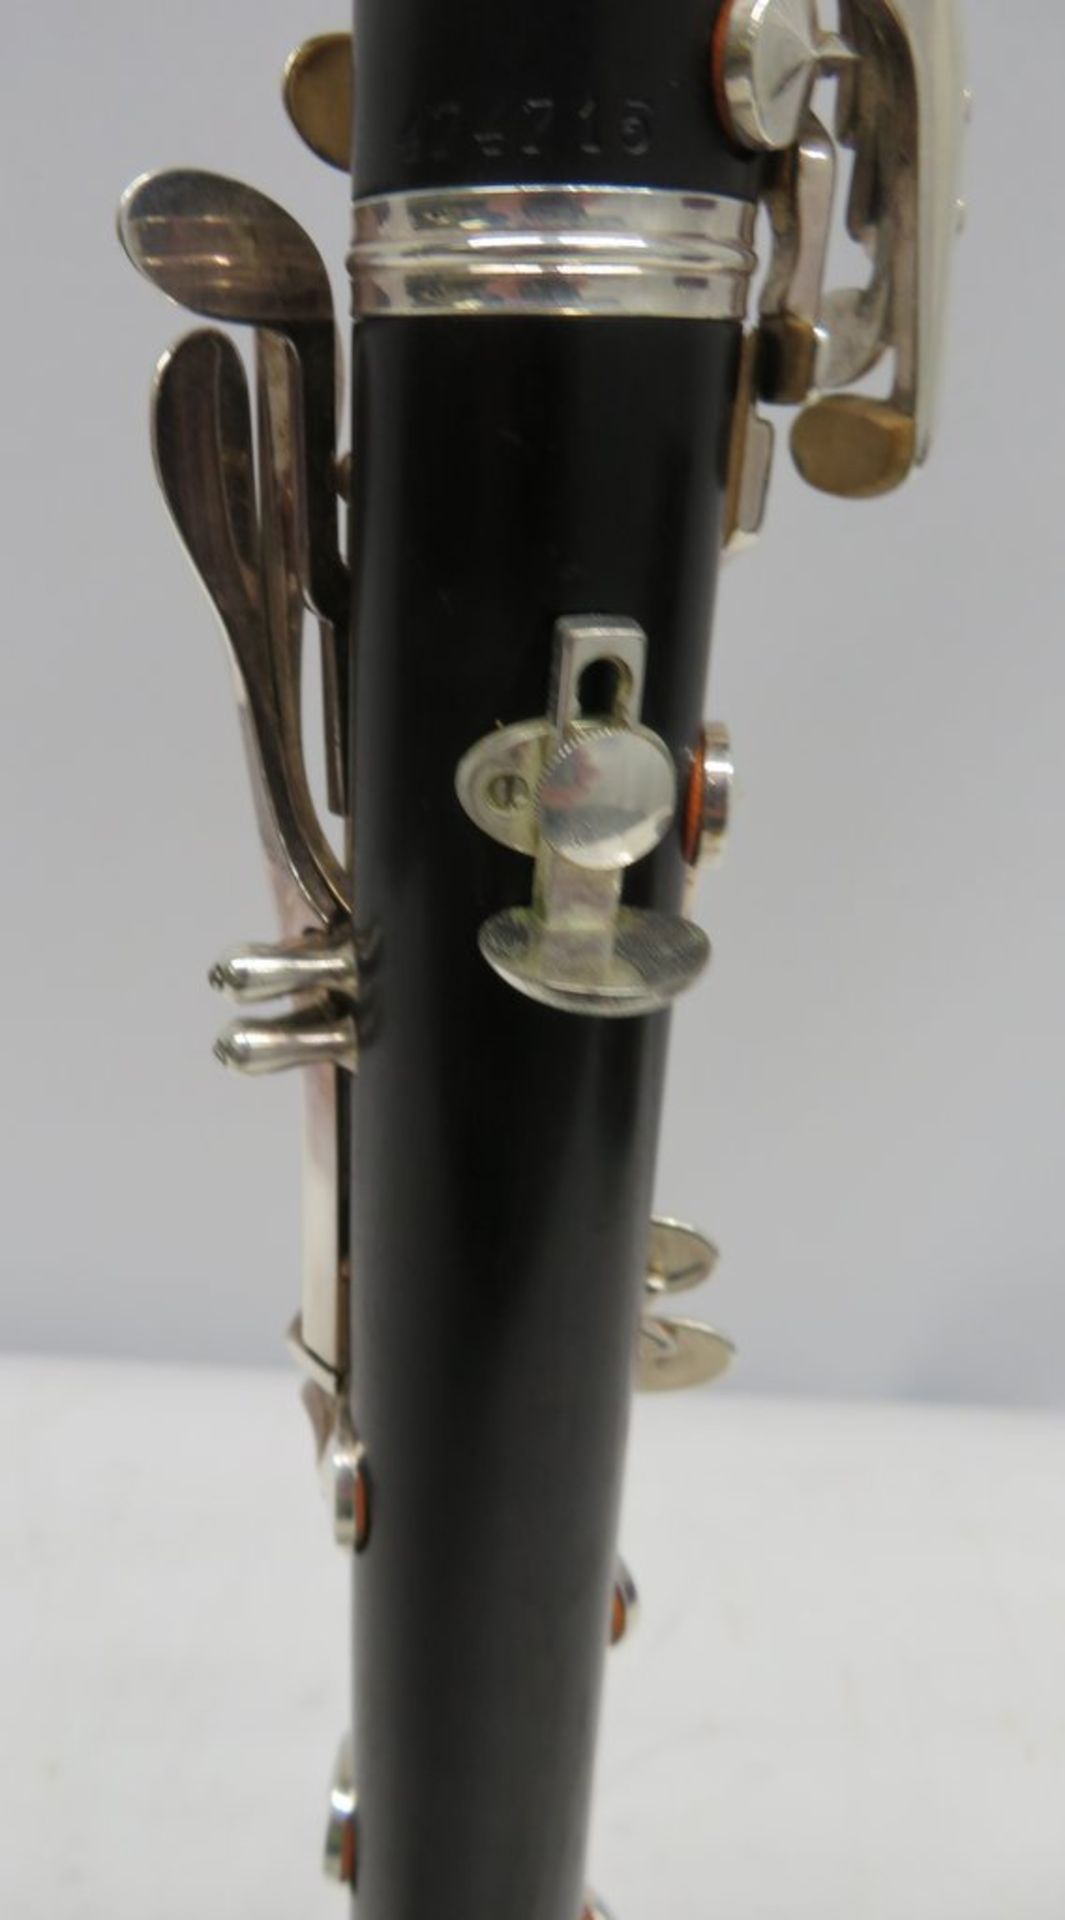 Buffet Crampon Clarinet Complete With Case. - Image 10 of 15